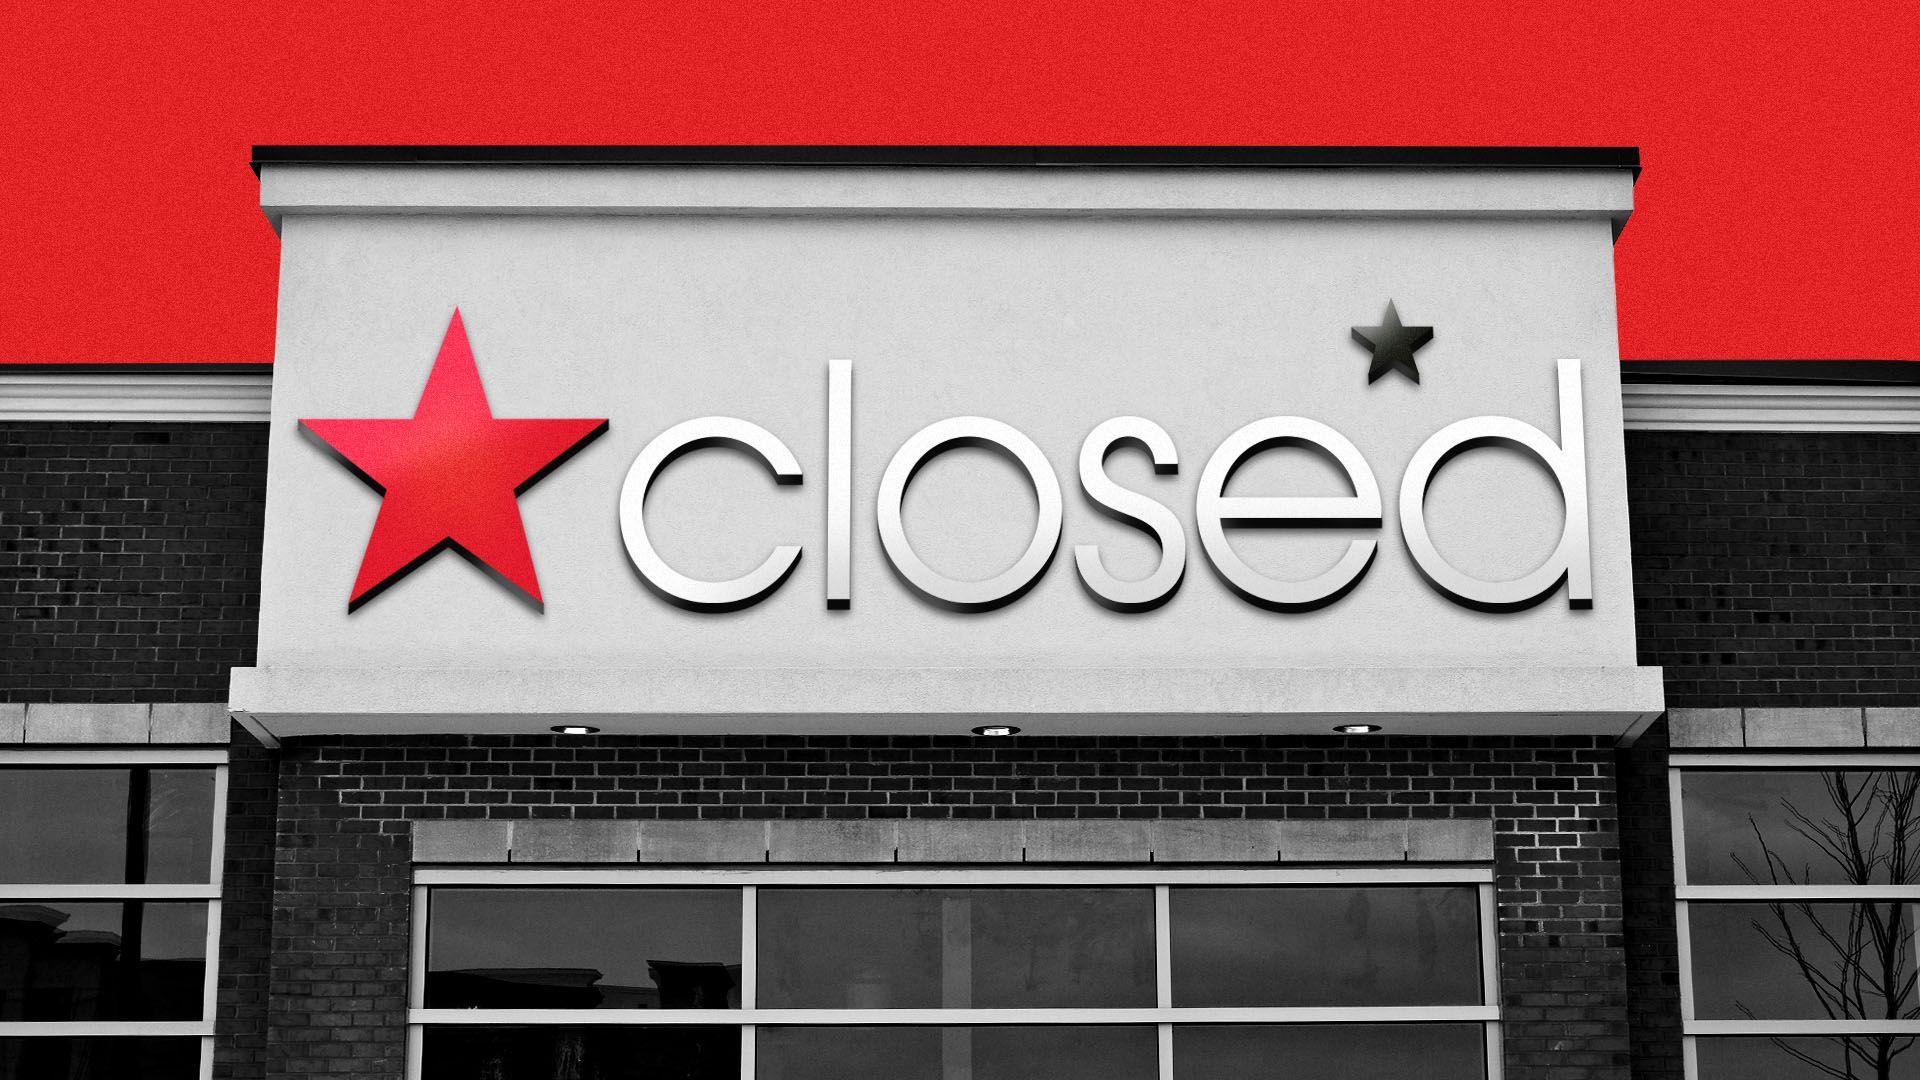 Illustration of a storefront with a logo reading "closed" with two stars